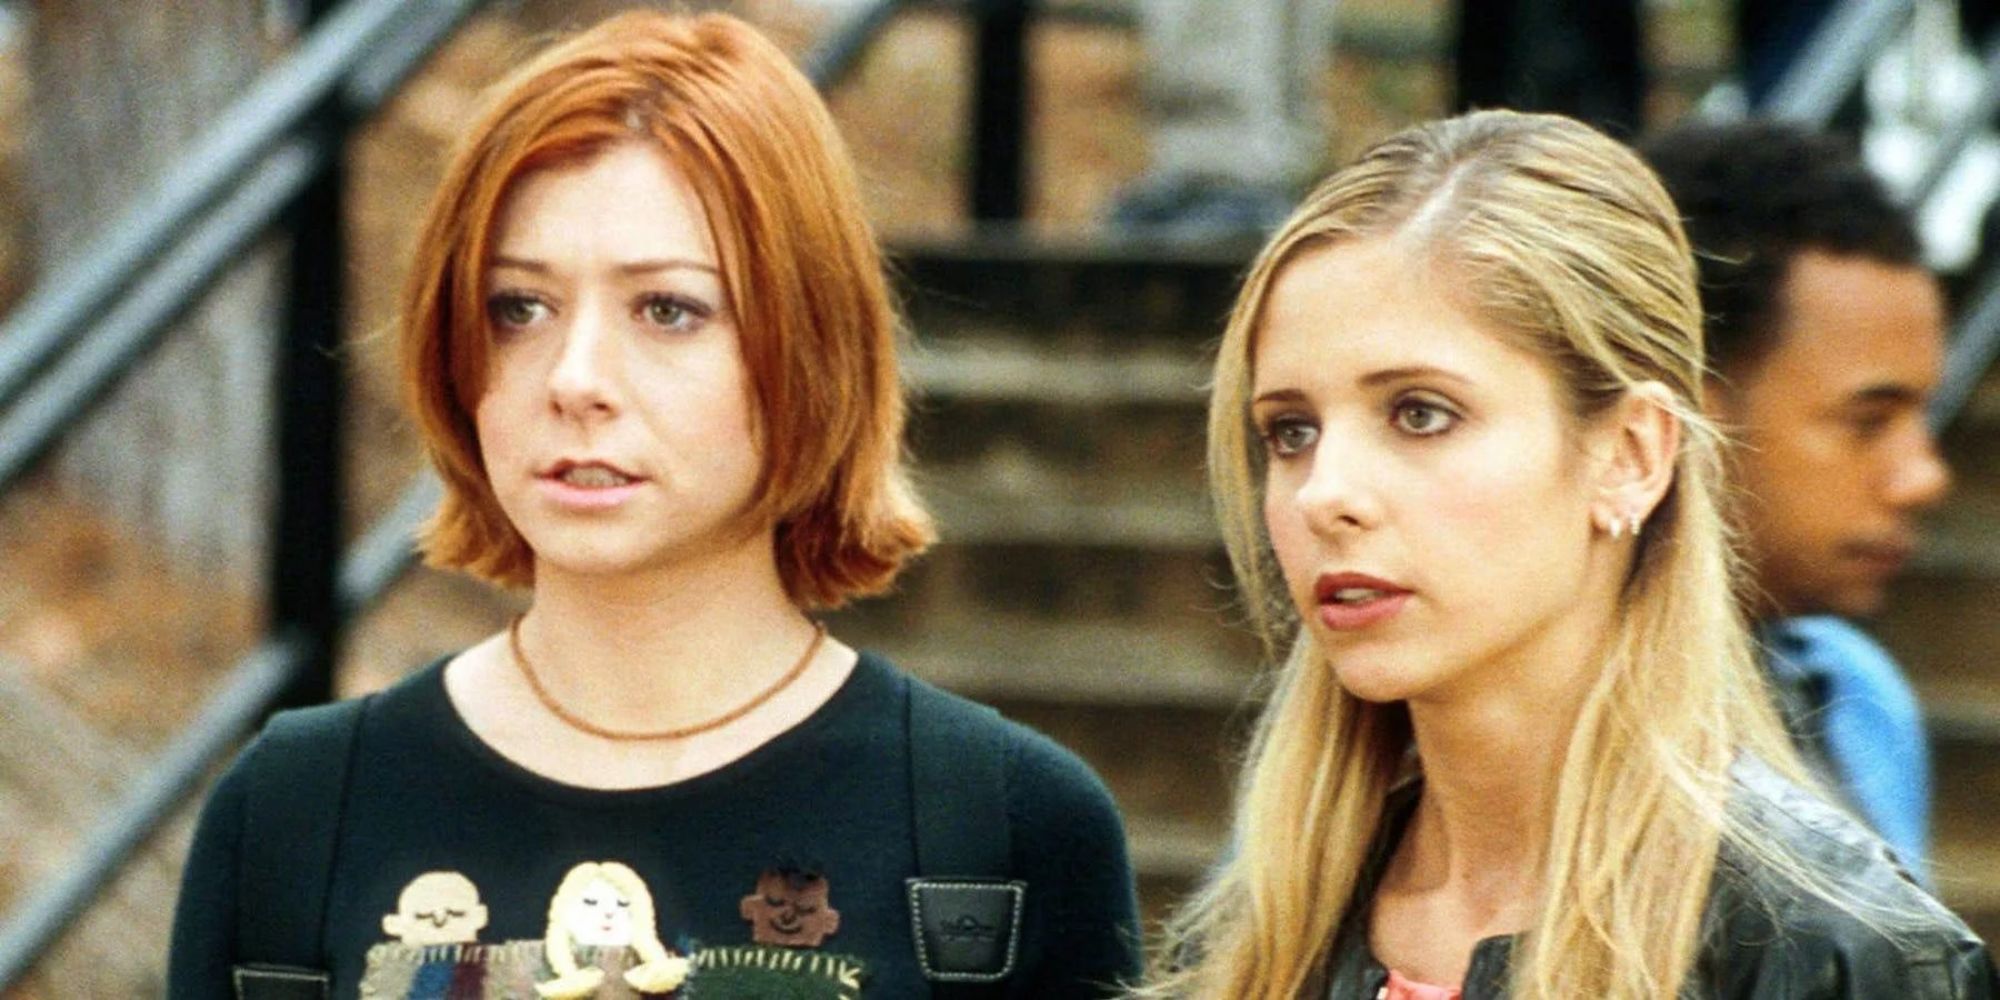 Willow & Buffy from Buffy the Vampire Slayer